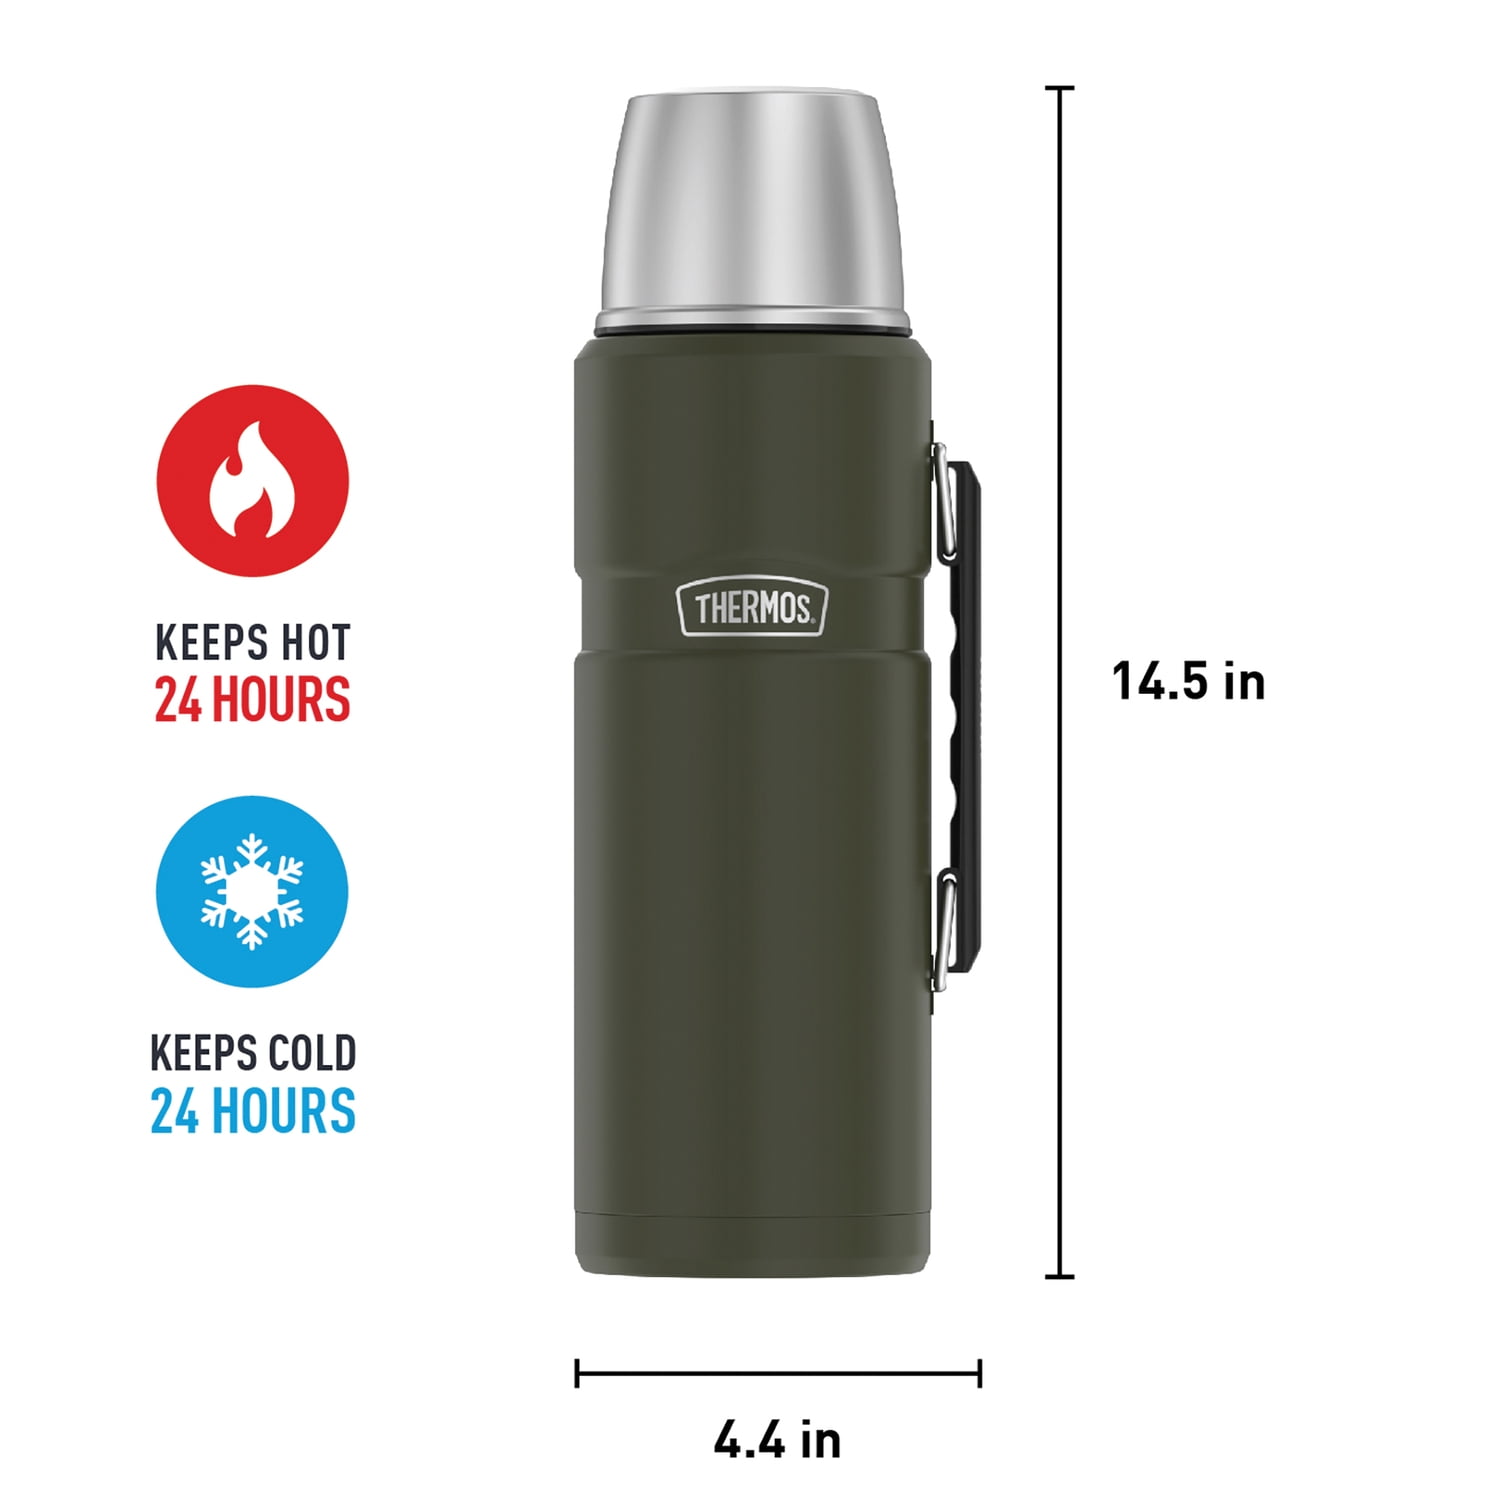 Predicting How Long Coffee Stays Warm in a Vacuum Flask